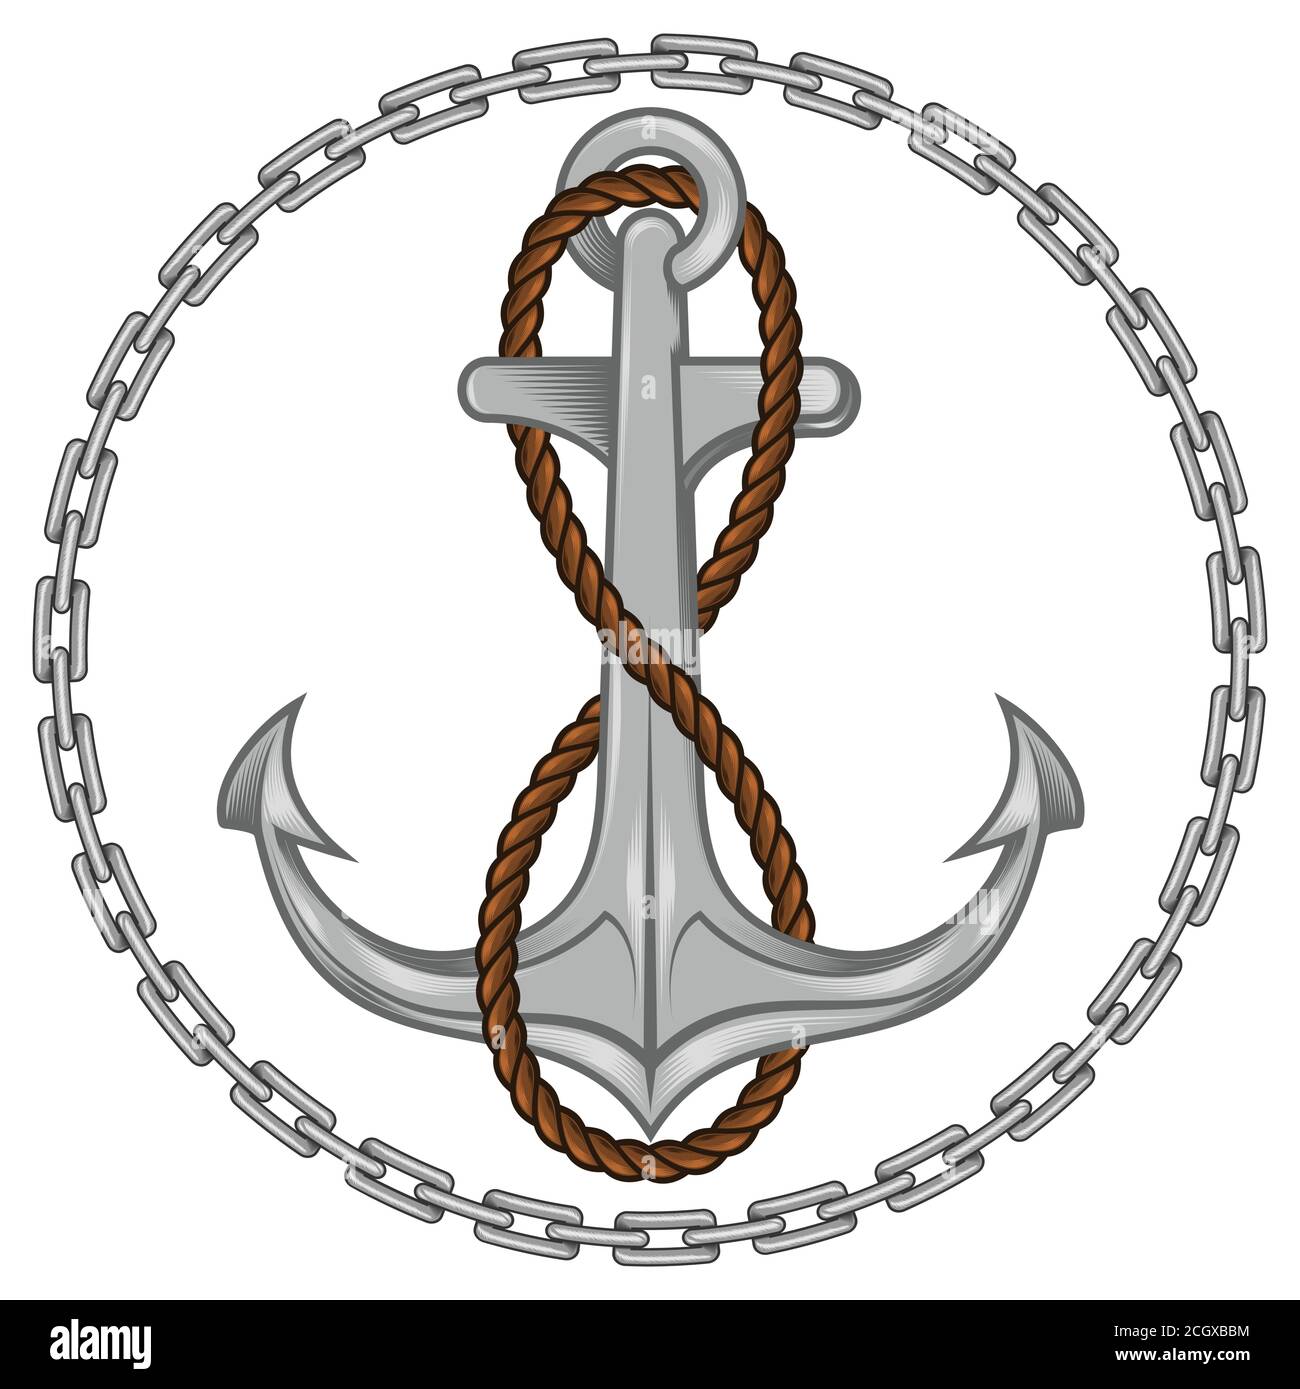 Vector illustration of dock anchor with rope surrounded by chains, on white background Stock Vector